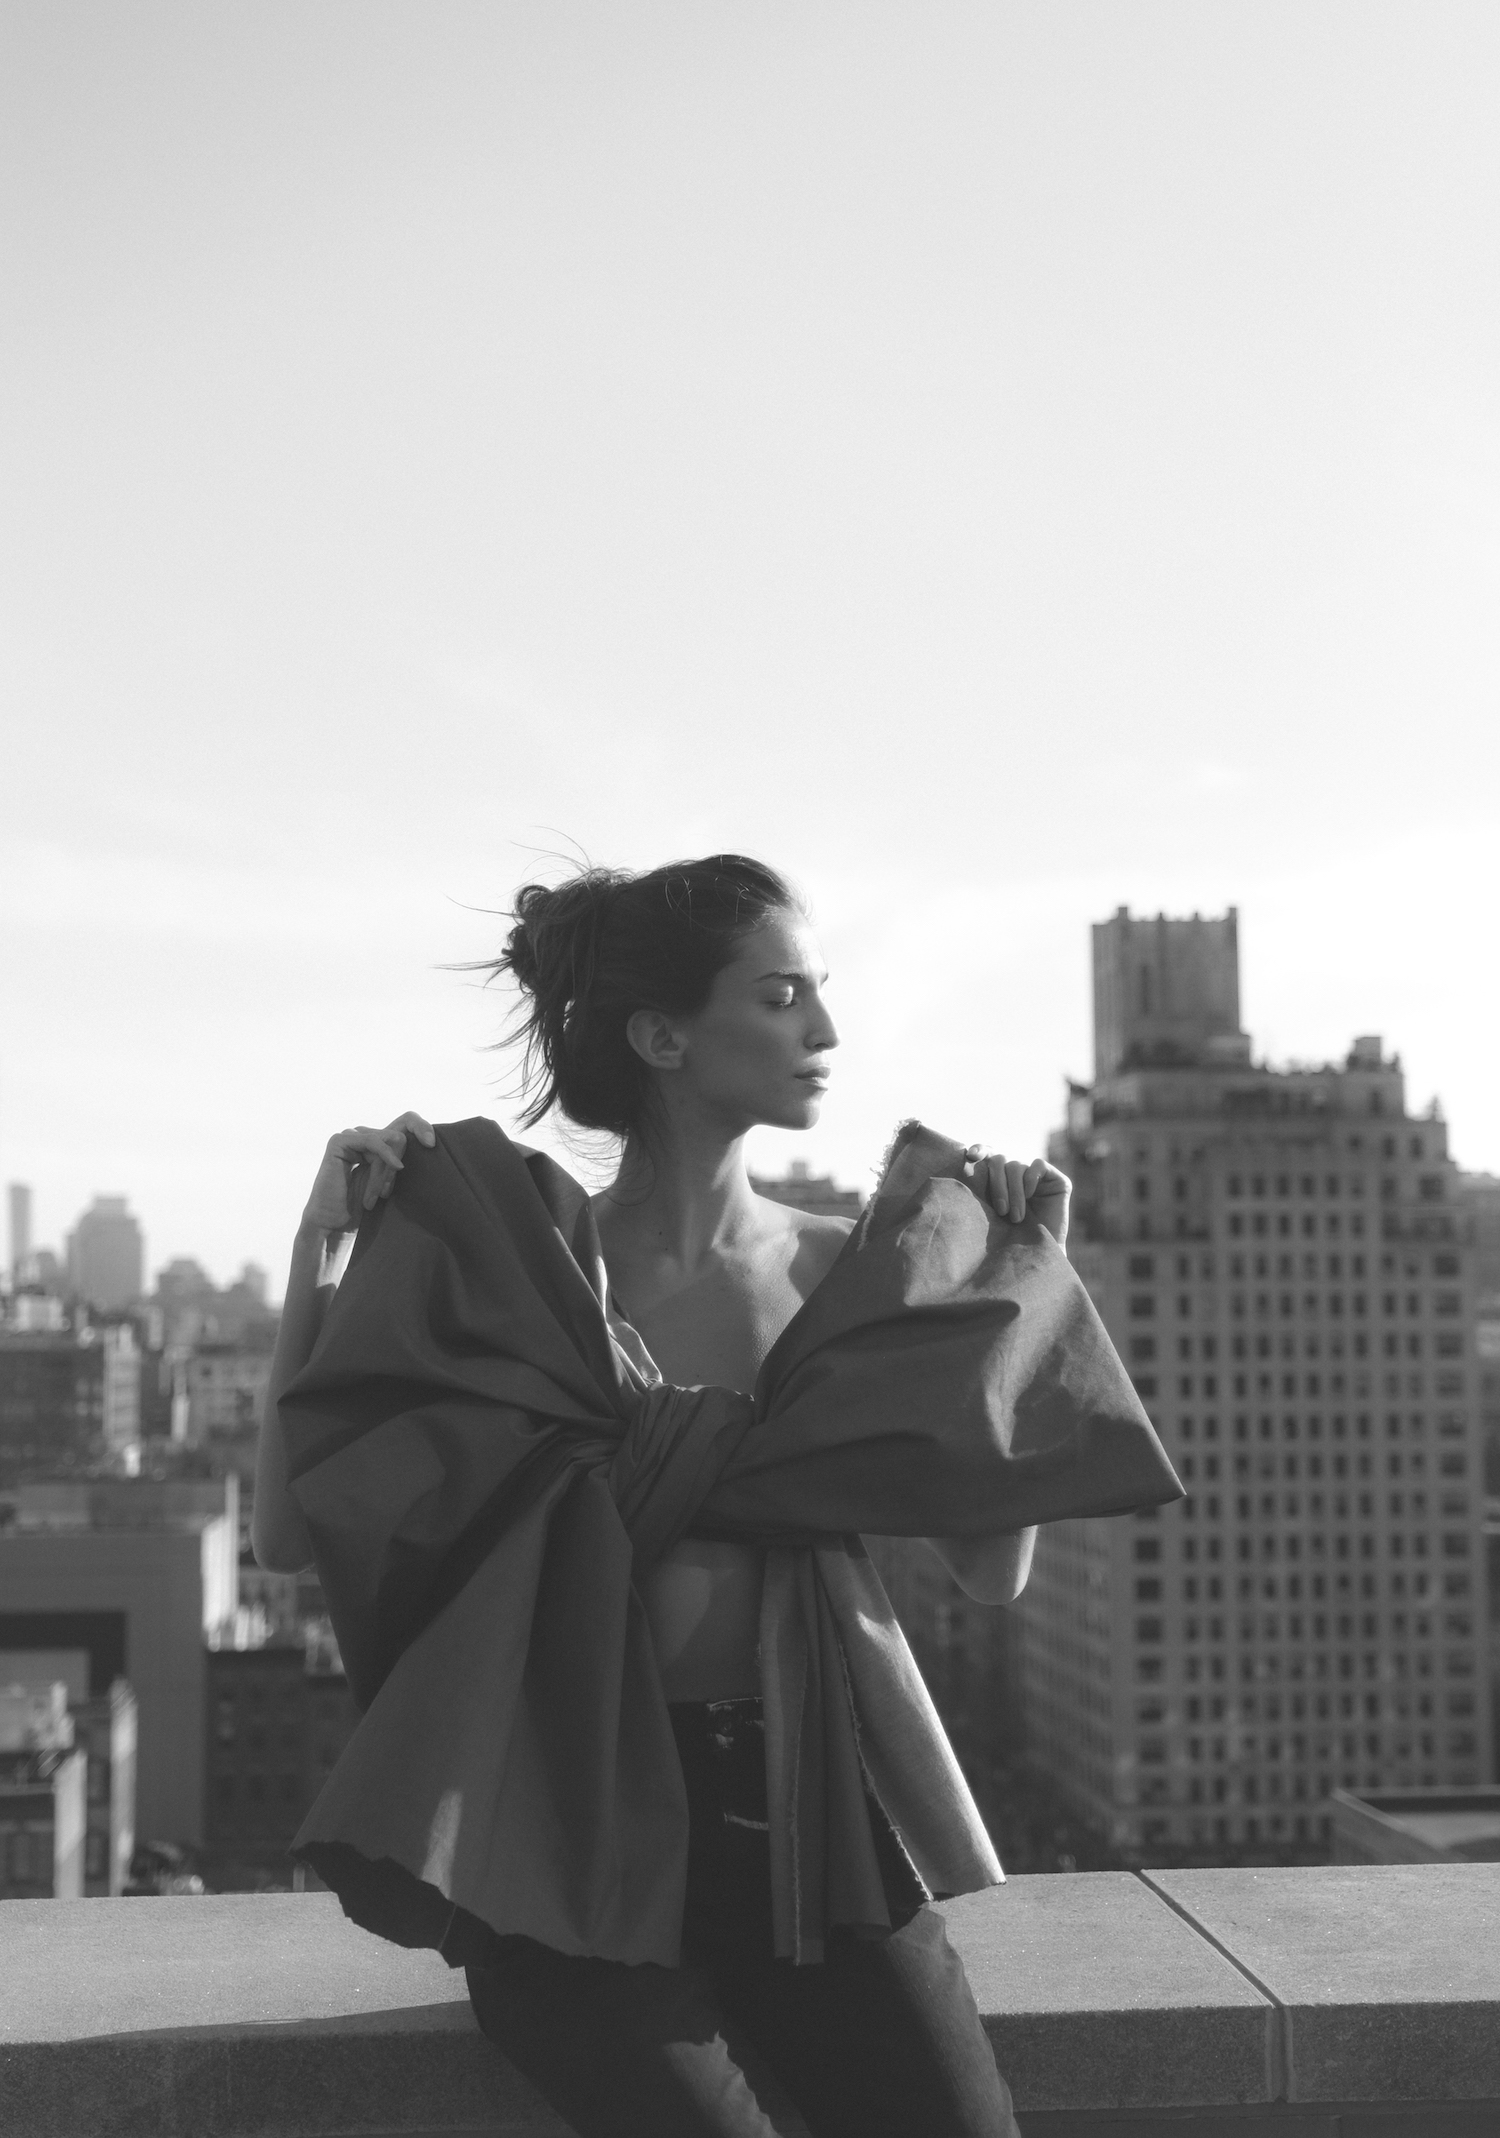 marina testino wrapped in large isko denim bow on rooftop with NYC in background